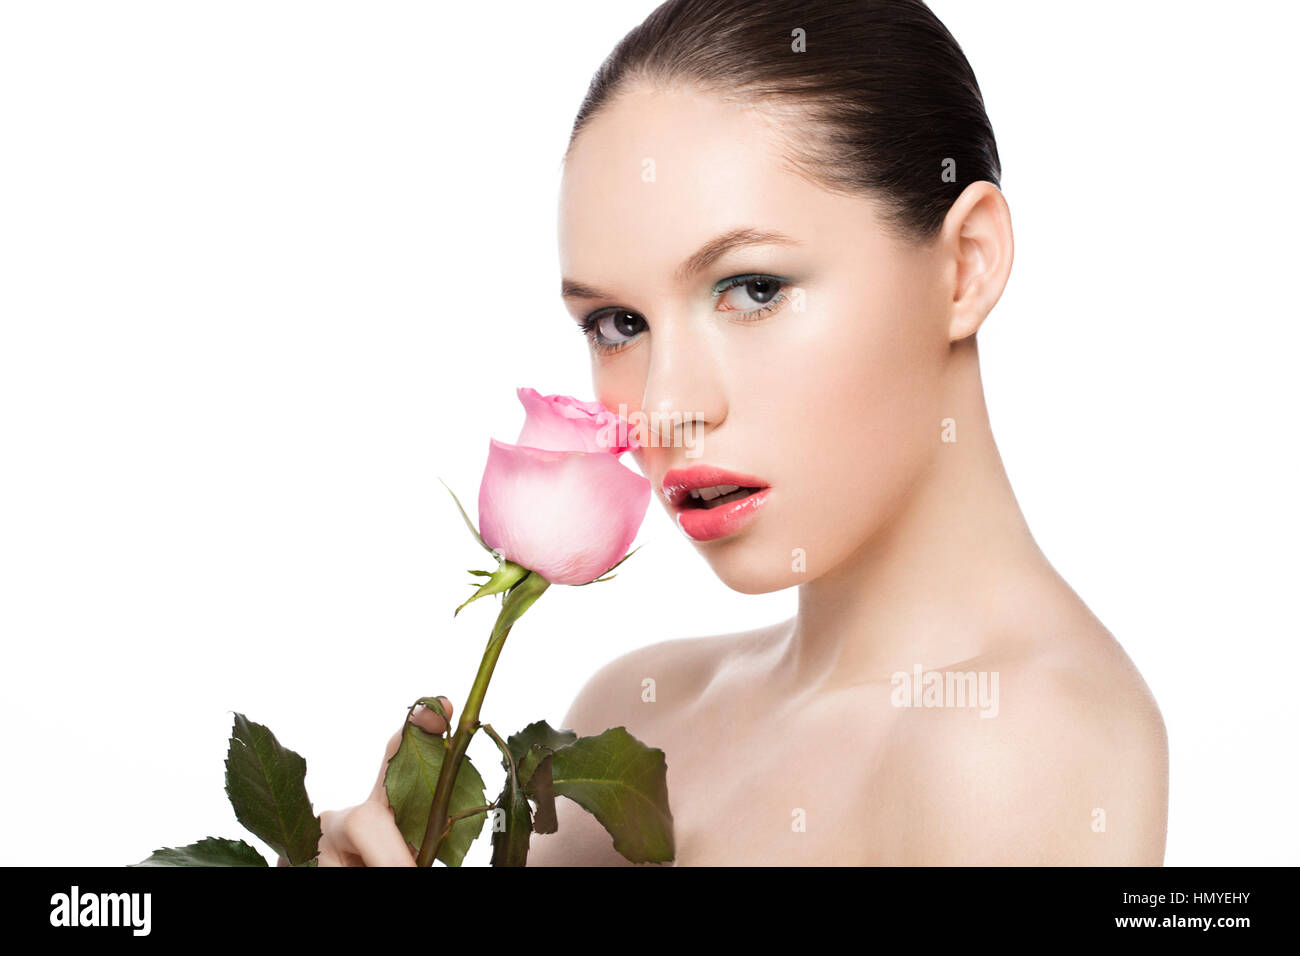 Beauty fashion model girl holding pink rose with natural makeup on white background Stock Photo